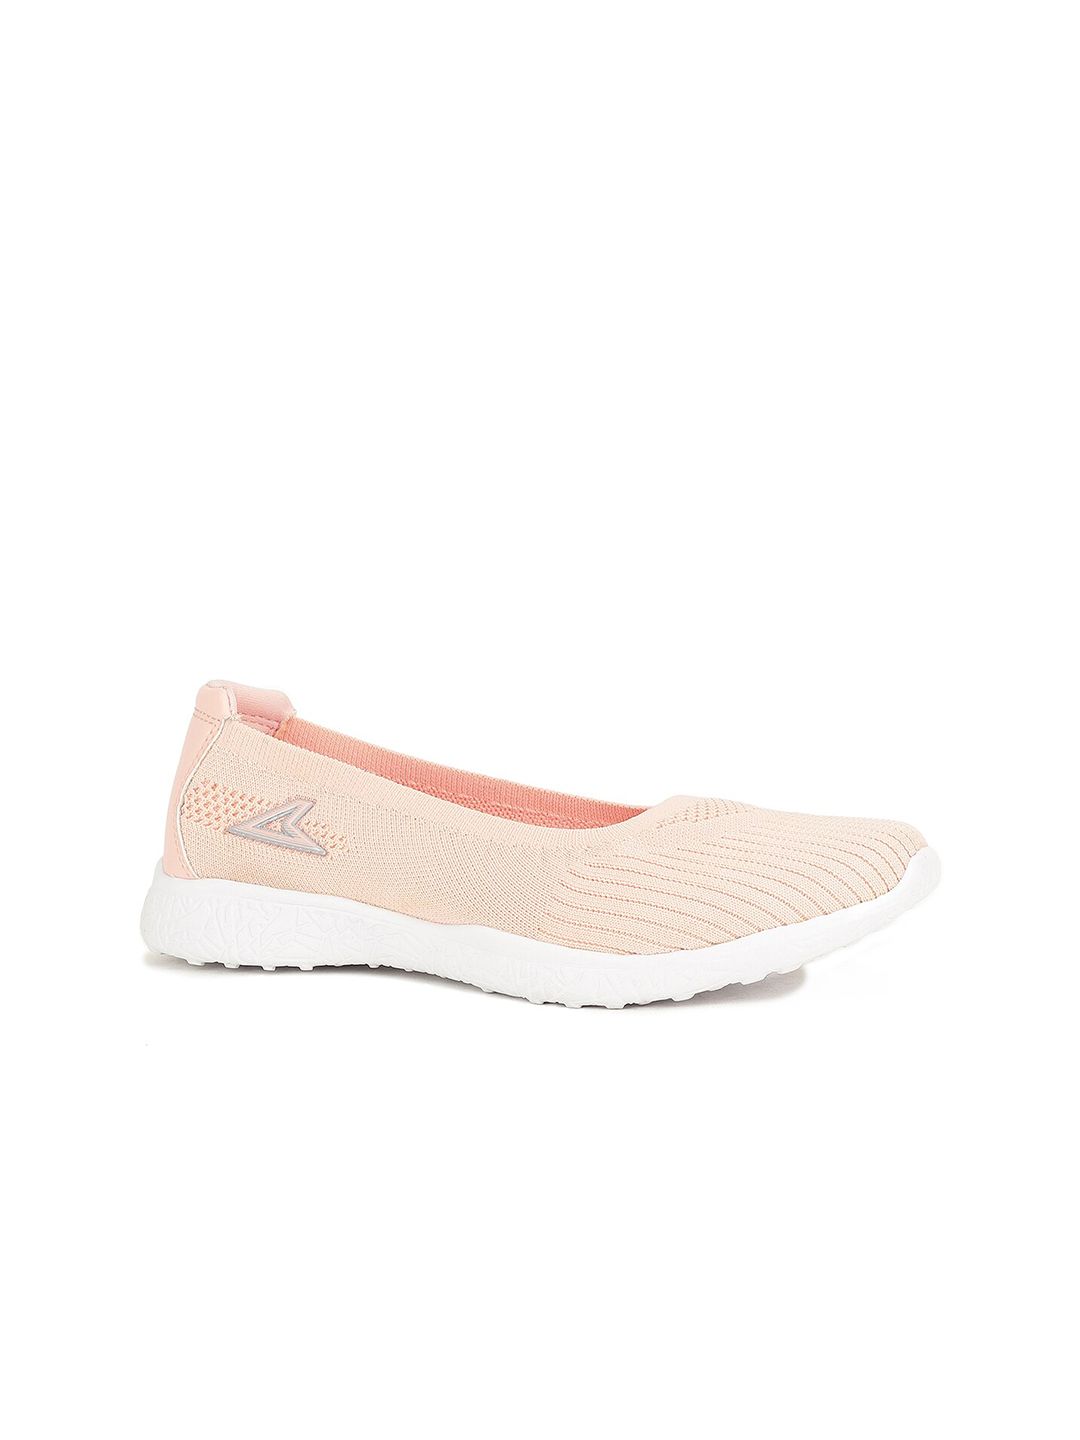 Power Women Peach-Coloured Textile Walking Non-Marking Shoes Price in India